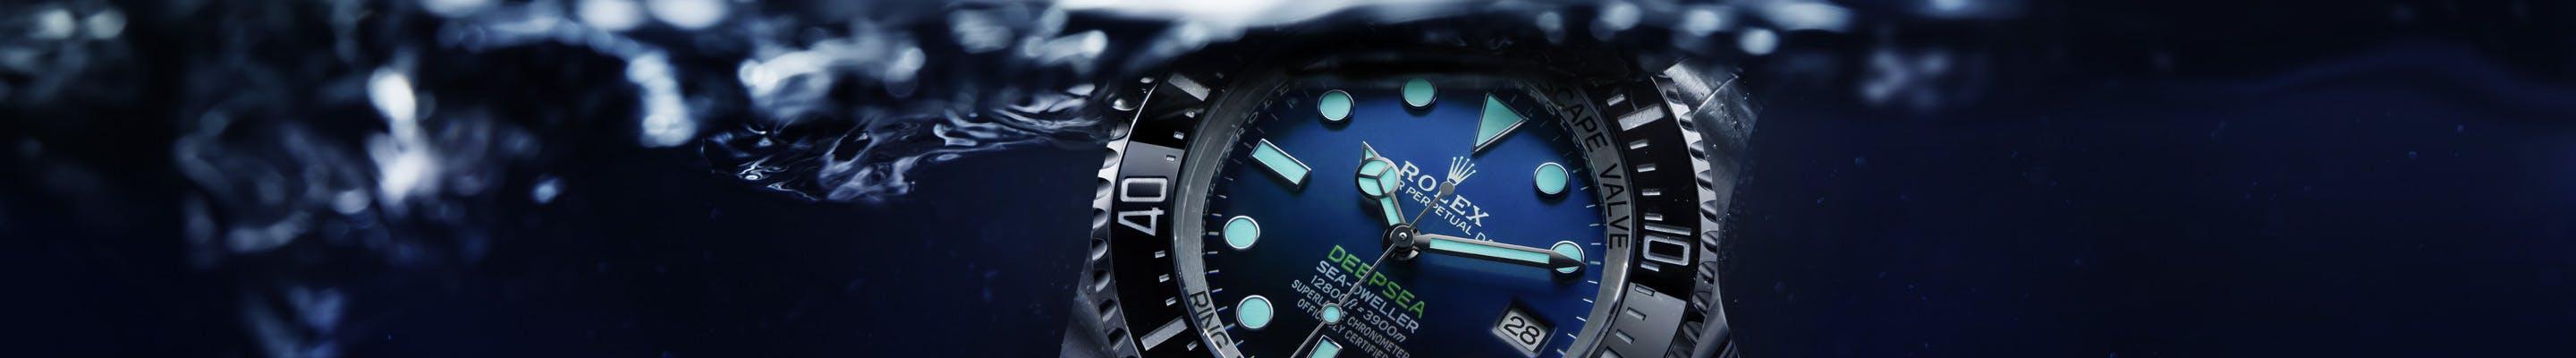 rolex deepsea collection at lee michaels